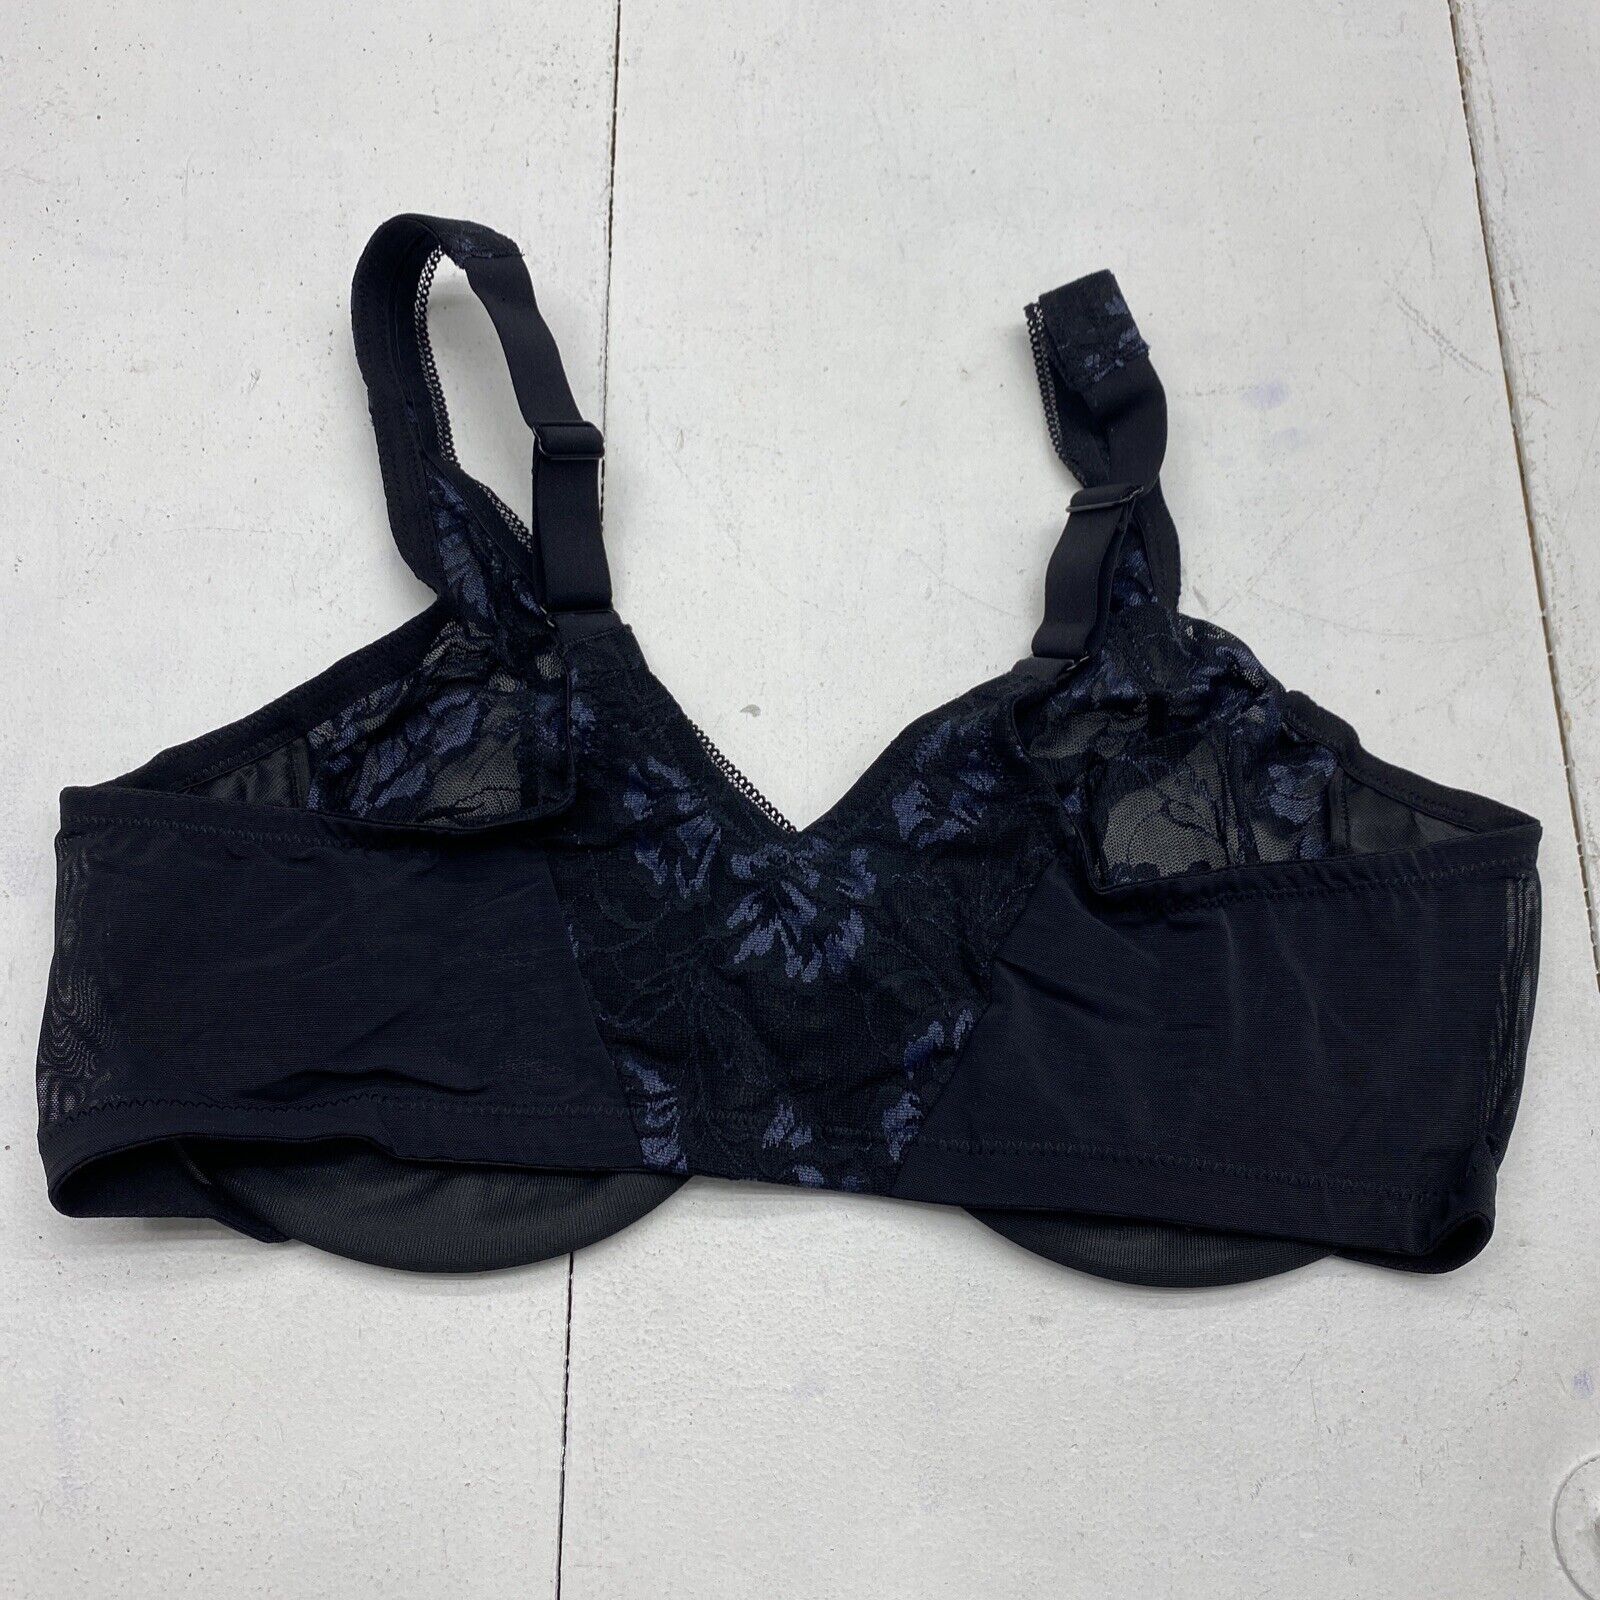 LG876 - Non wired Black lacy BRA 34D to 46J. 25 PCS - £8.00 each